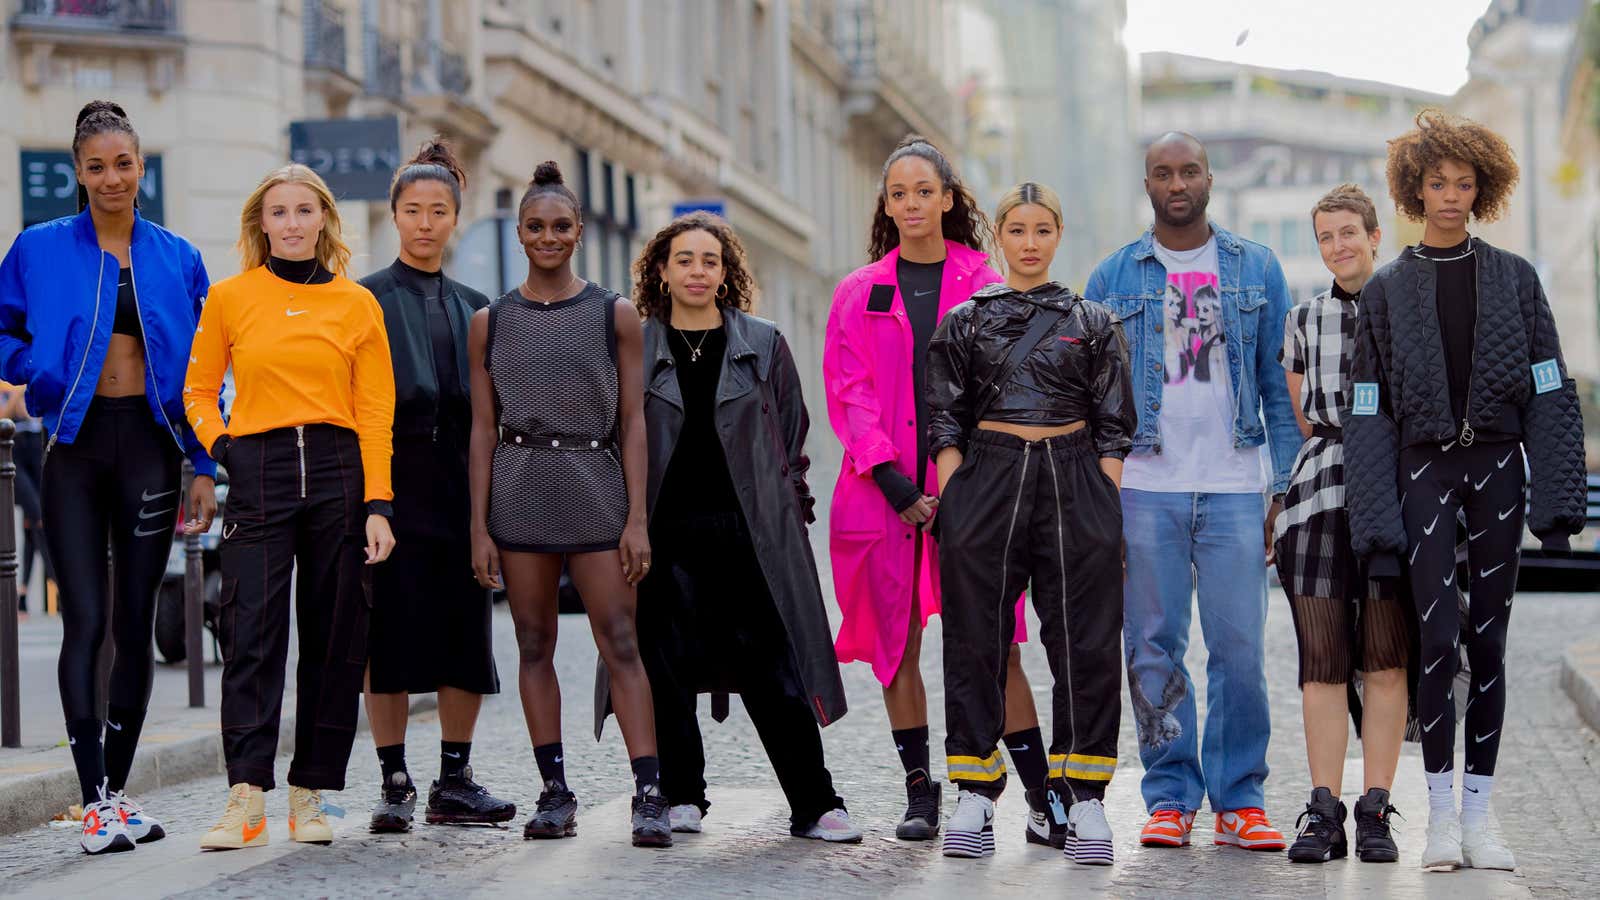 Sarah Andleman (second from right), Nike’s new global curator of Unlaced, stands alongside athletes and Nike collaborators after the Off-White show in Paris.